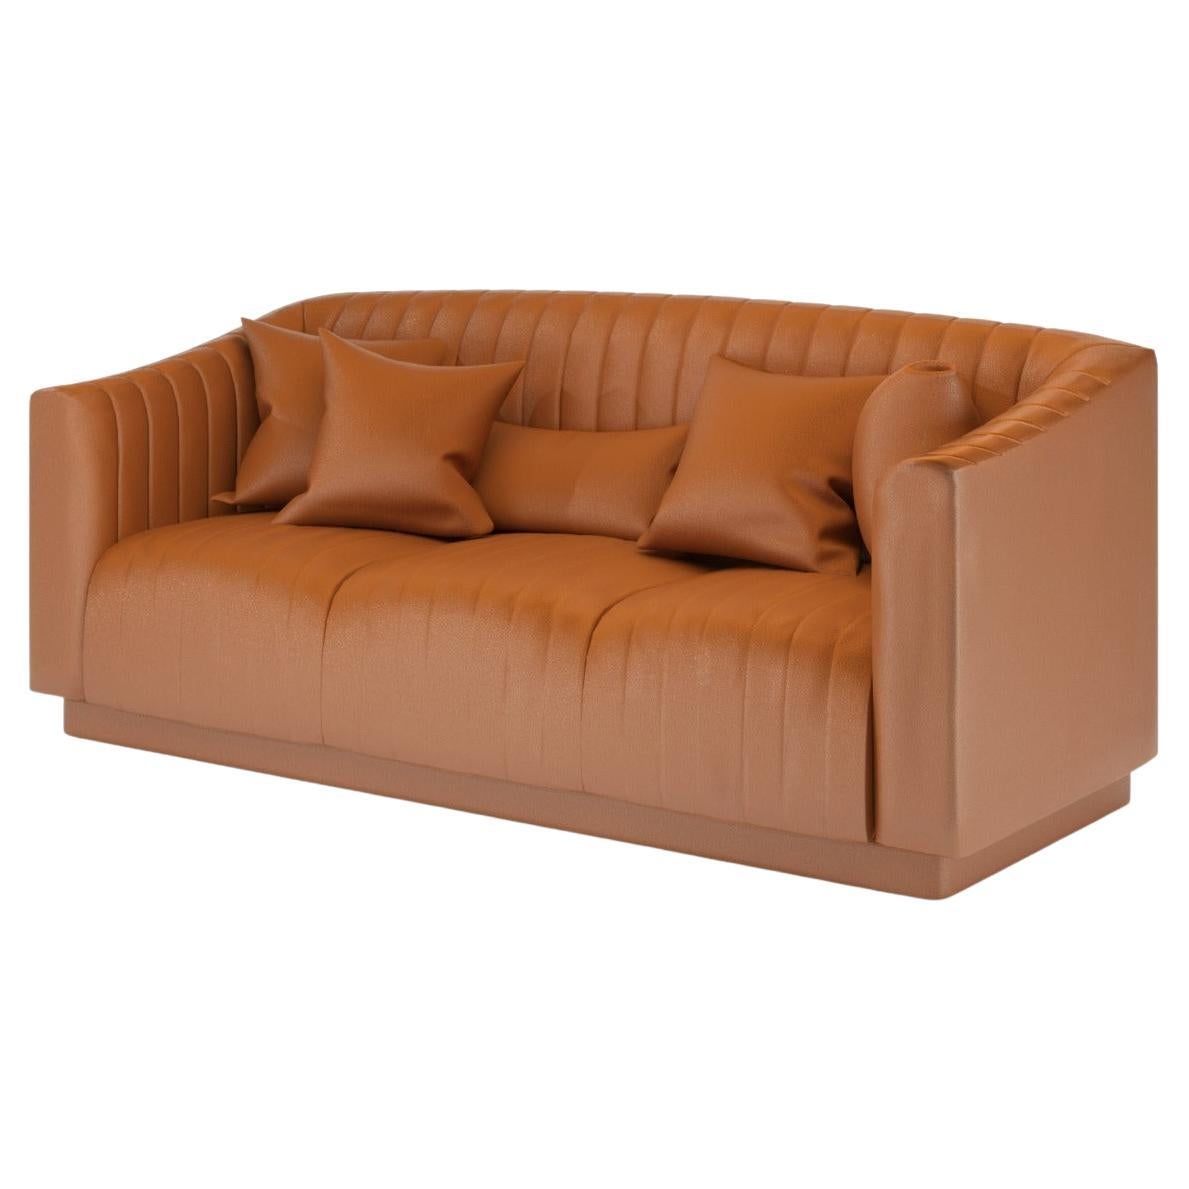 Brown Leather Modern Uphostery Sofa For Sale